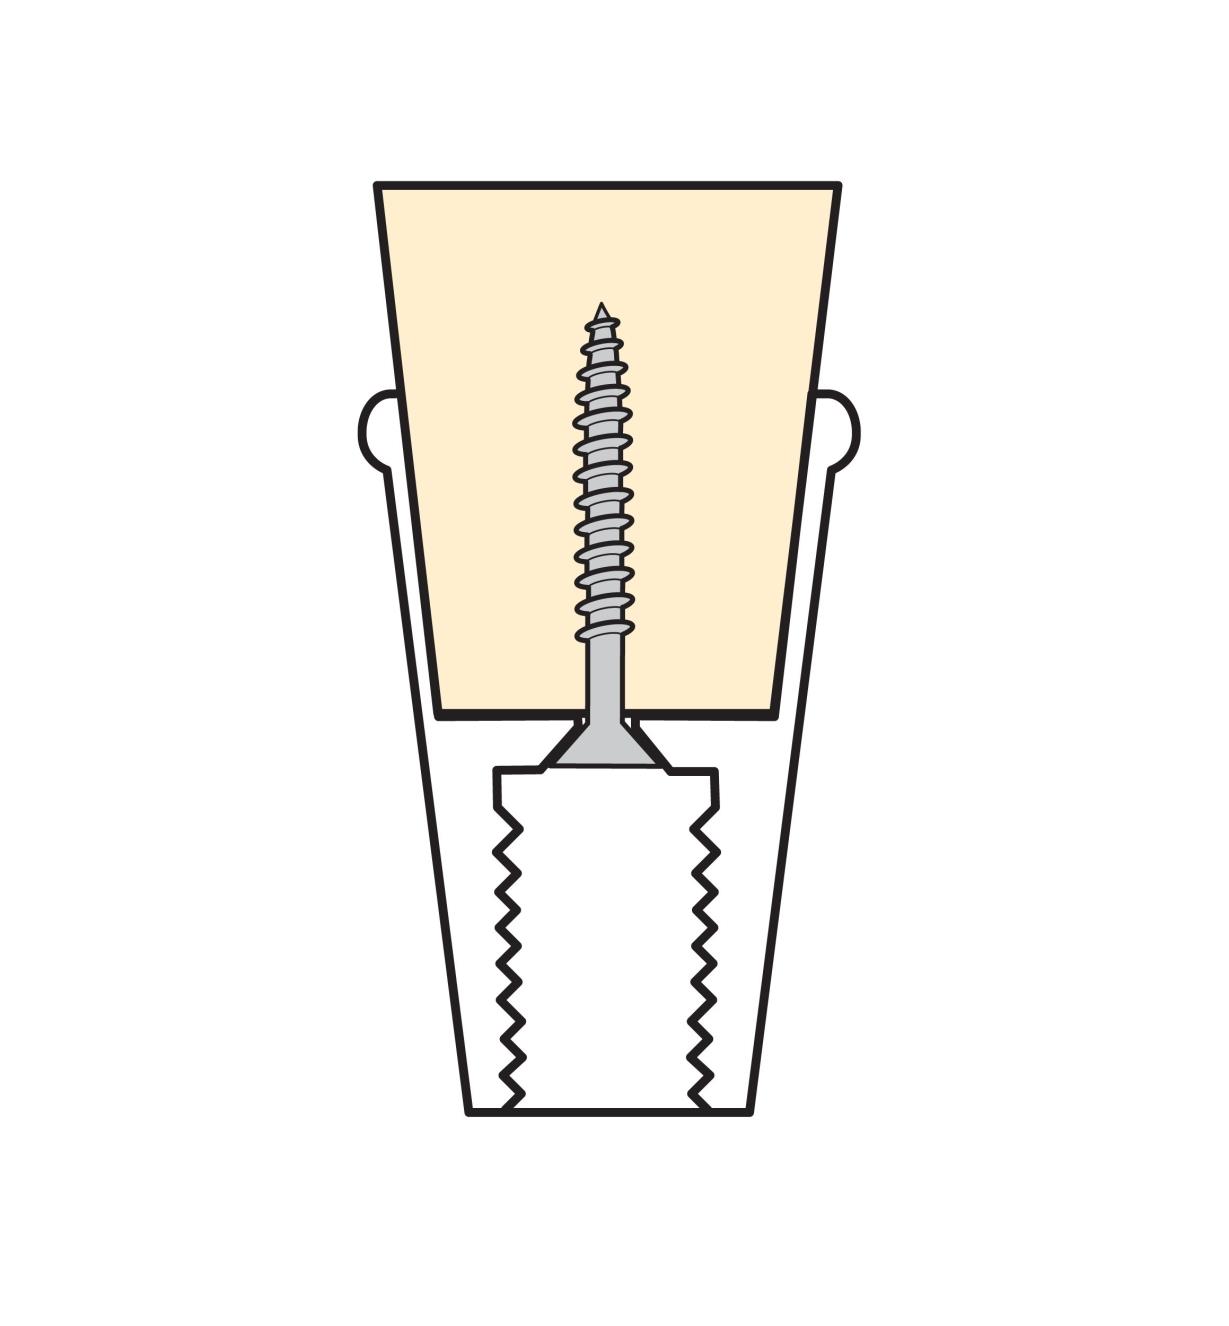 Cutaway diagram showing how the tips are installed on the cane with a screw